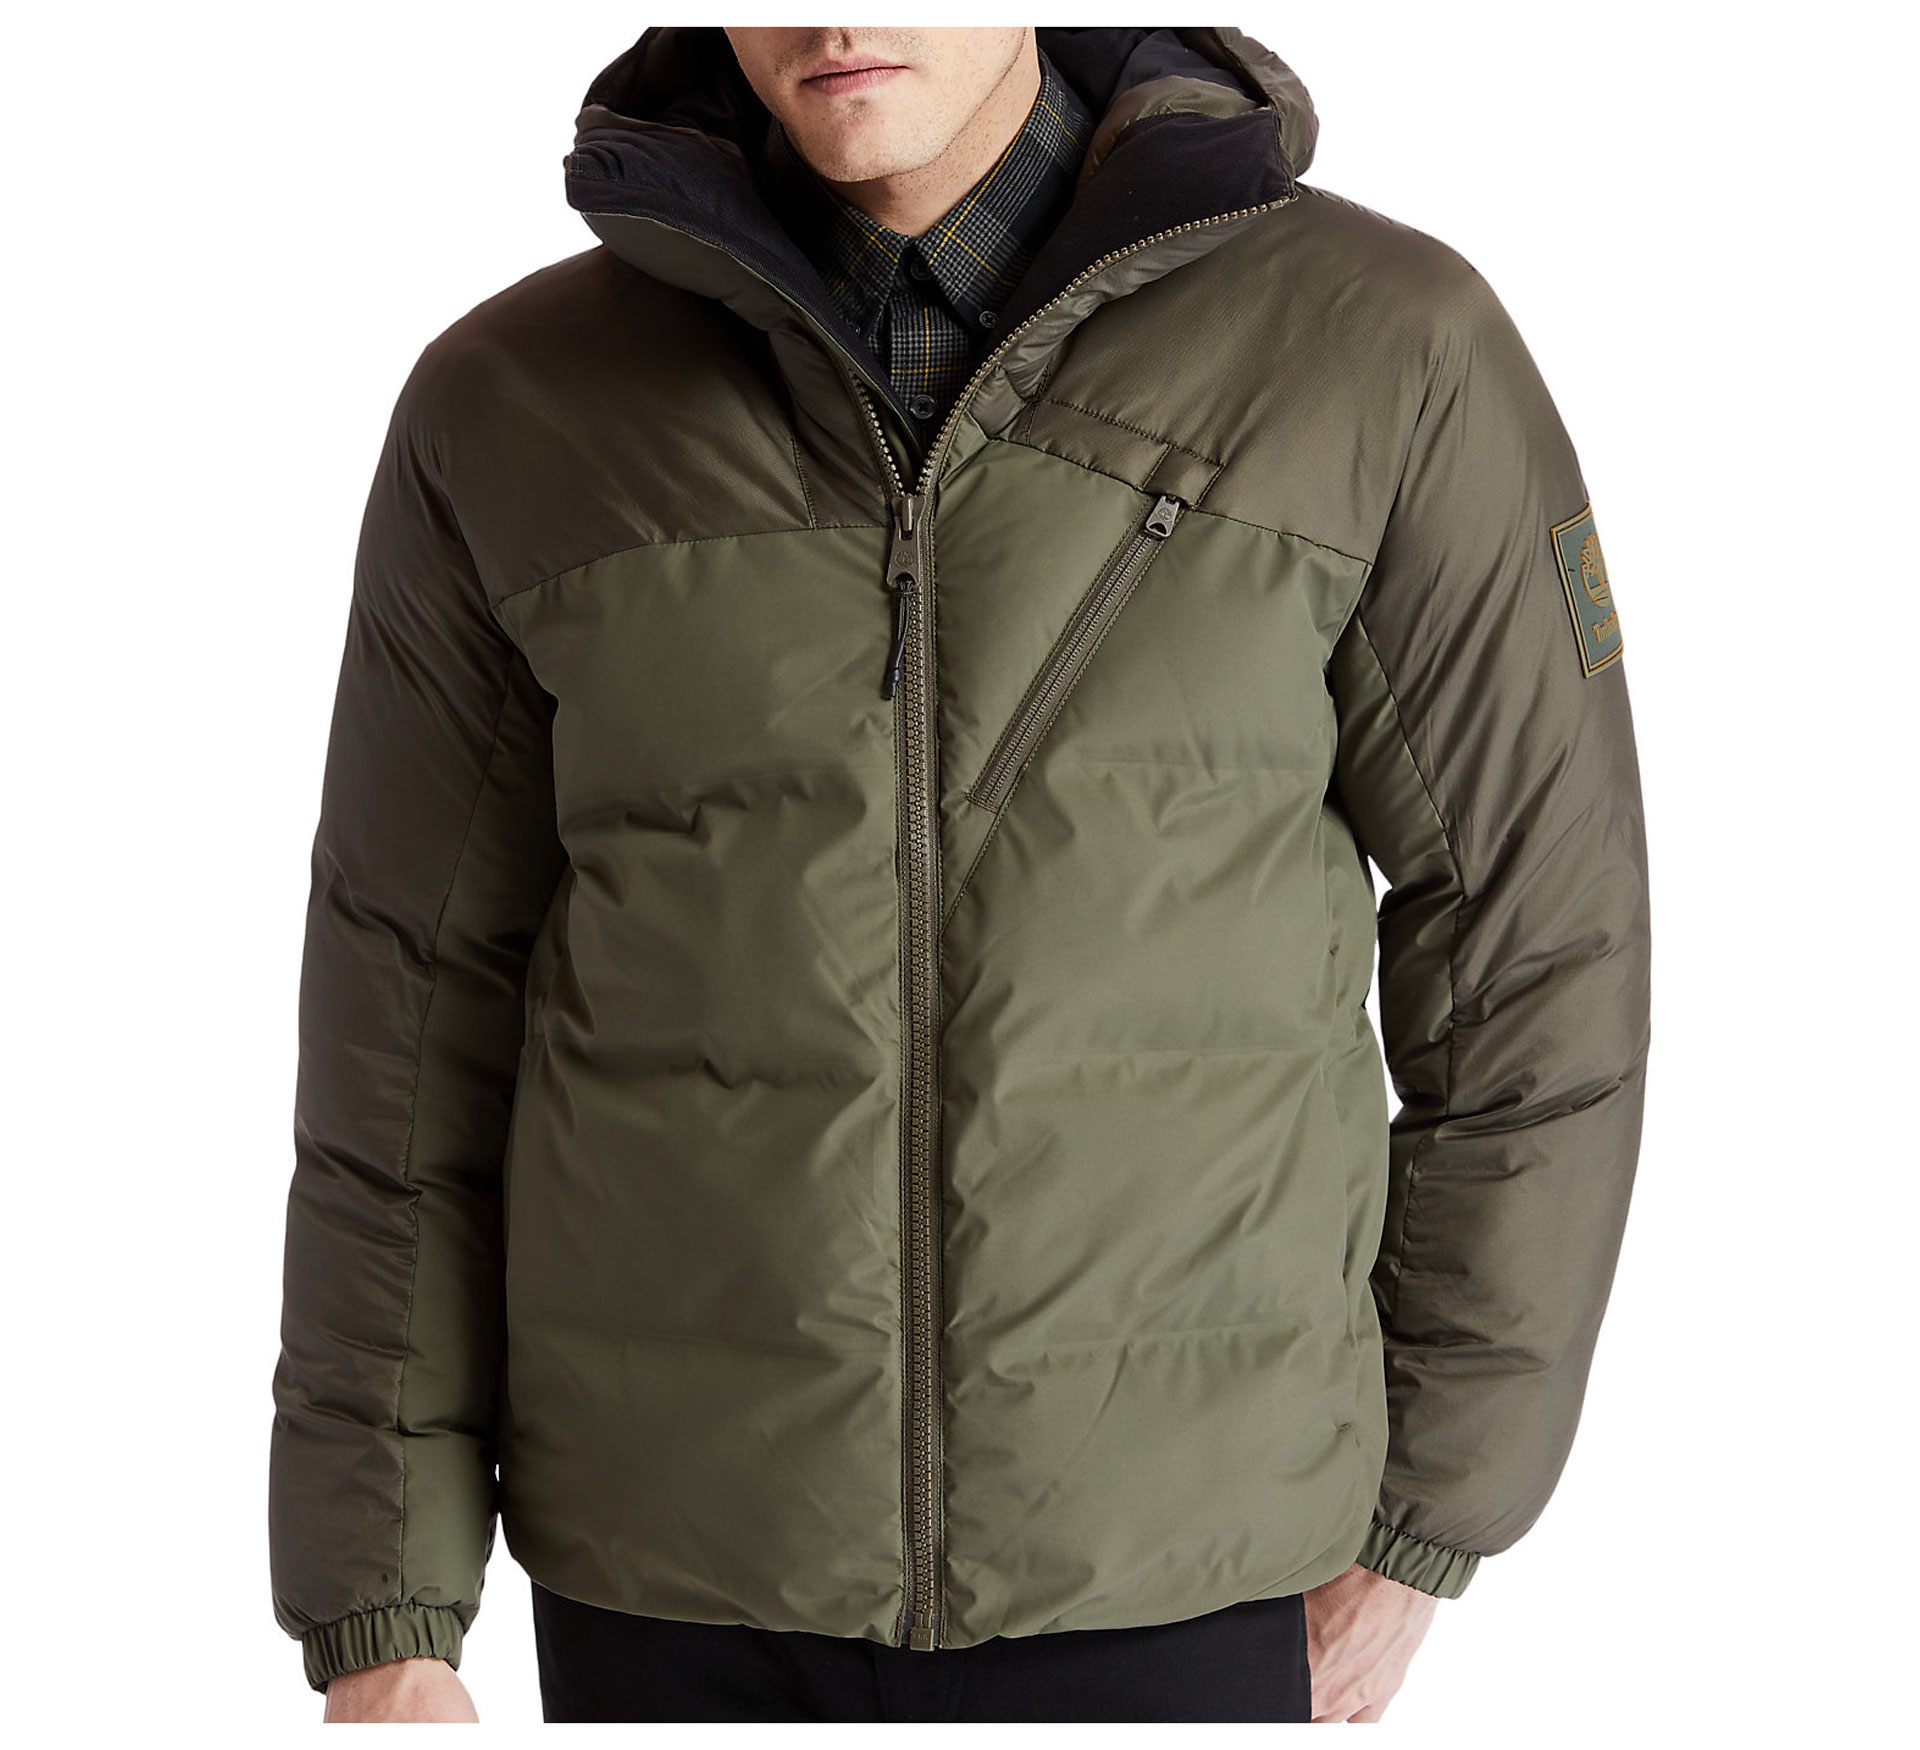 Timberland Neo Manteau d'hiver Hommes